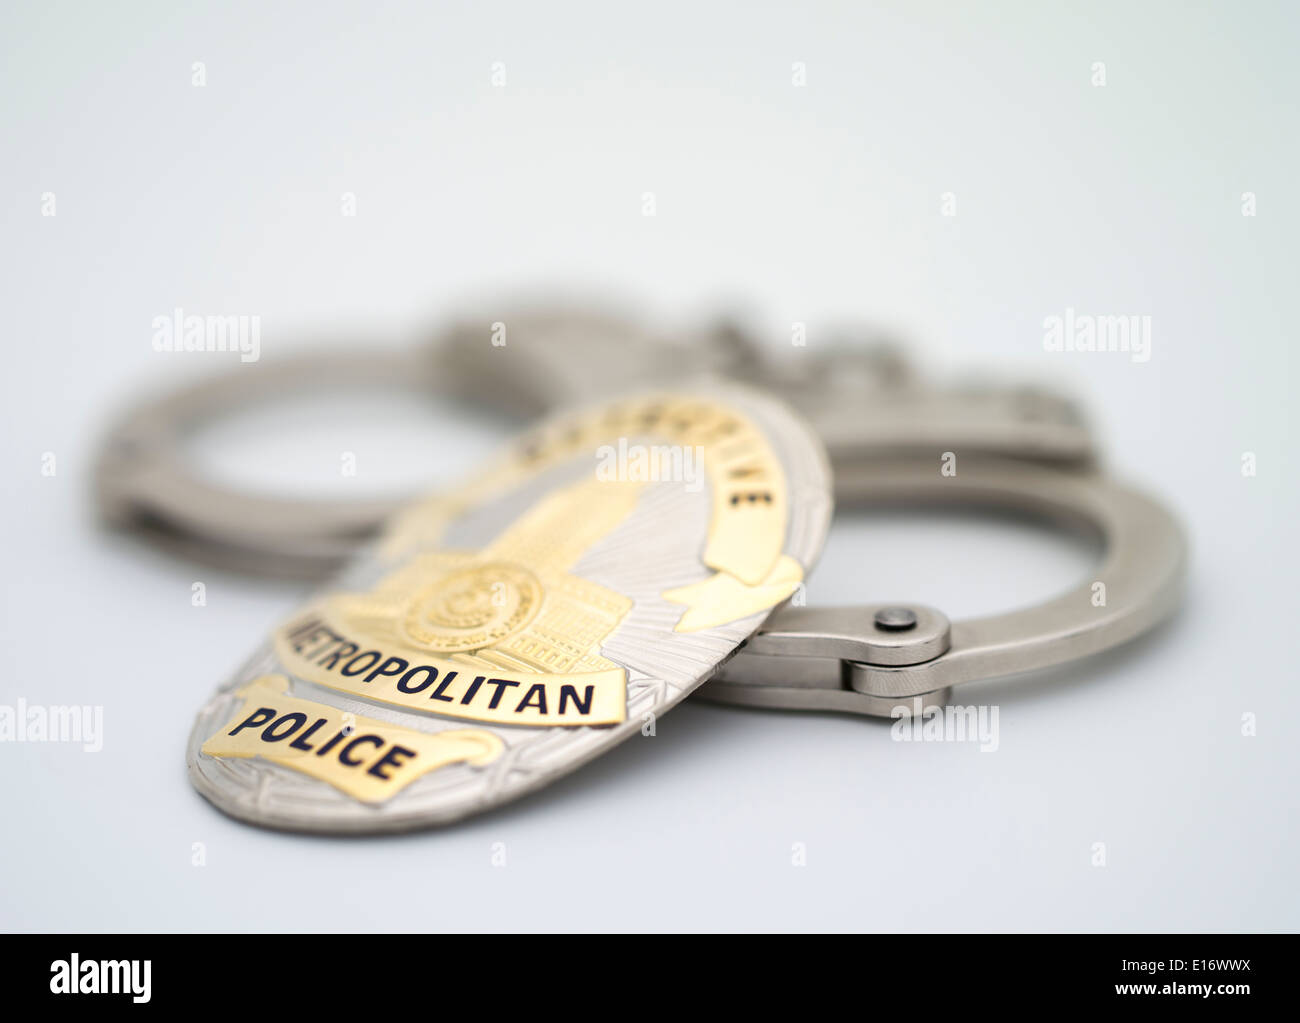 Metropolitan Police Detective Shield with Smith & Wesson Police issue handcuffs Stock Photo